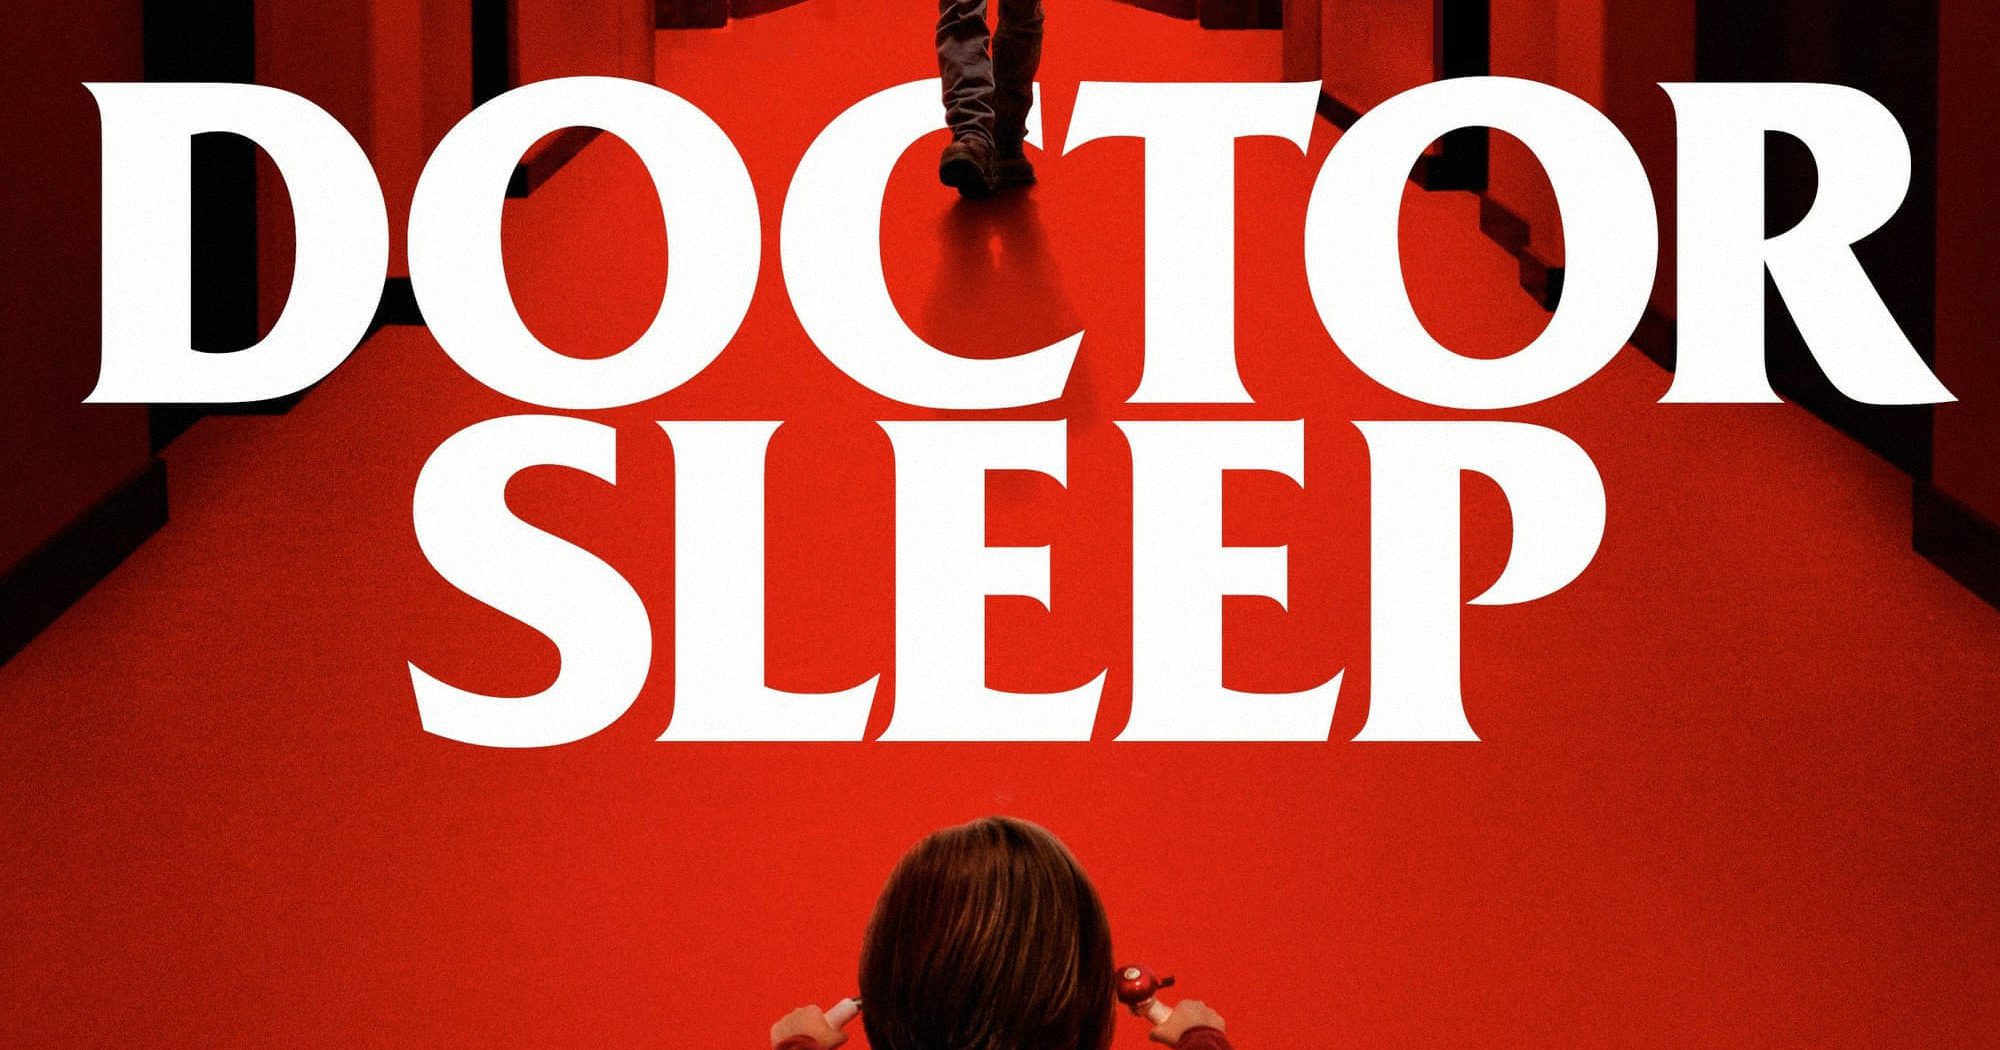 Poster for the movie "Doctor Sleep"